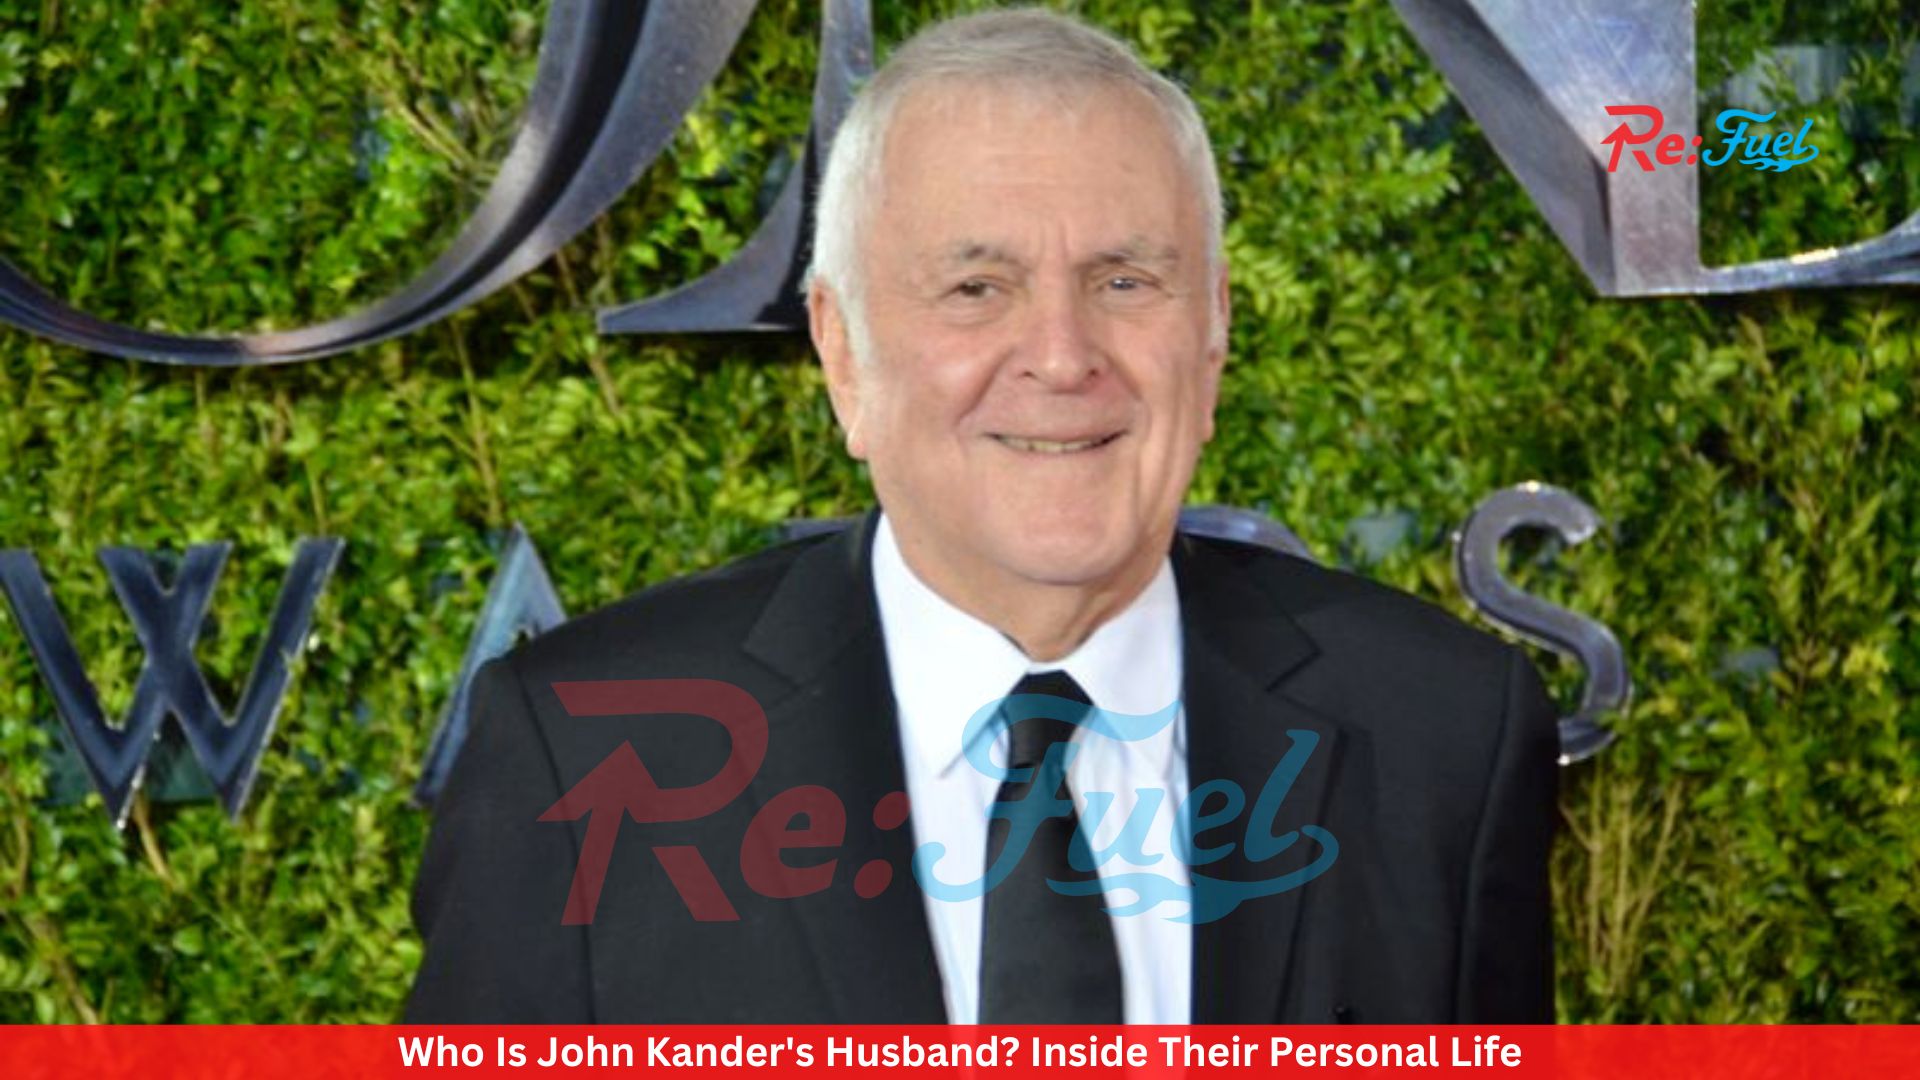 Who Is John Kander's Husband? Inside Their Personal Life